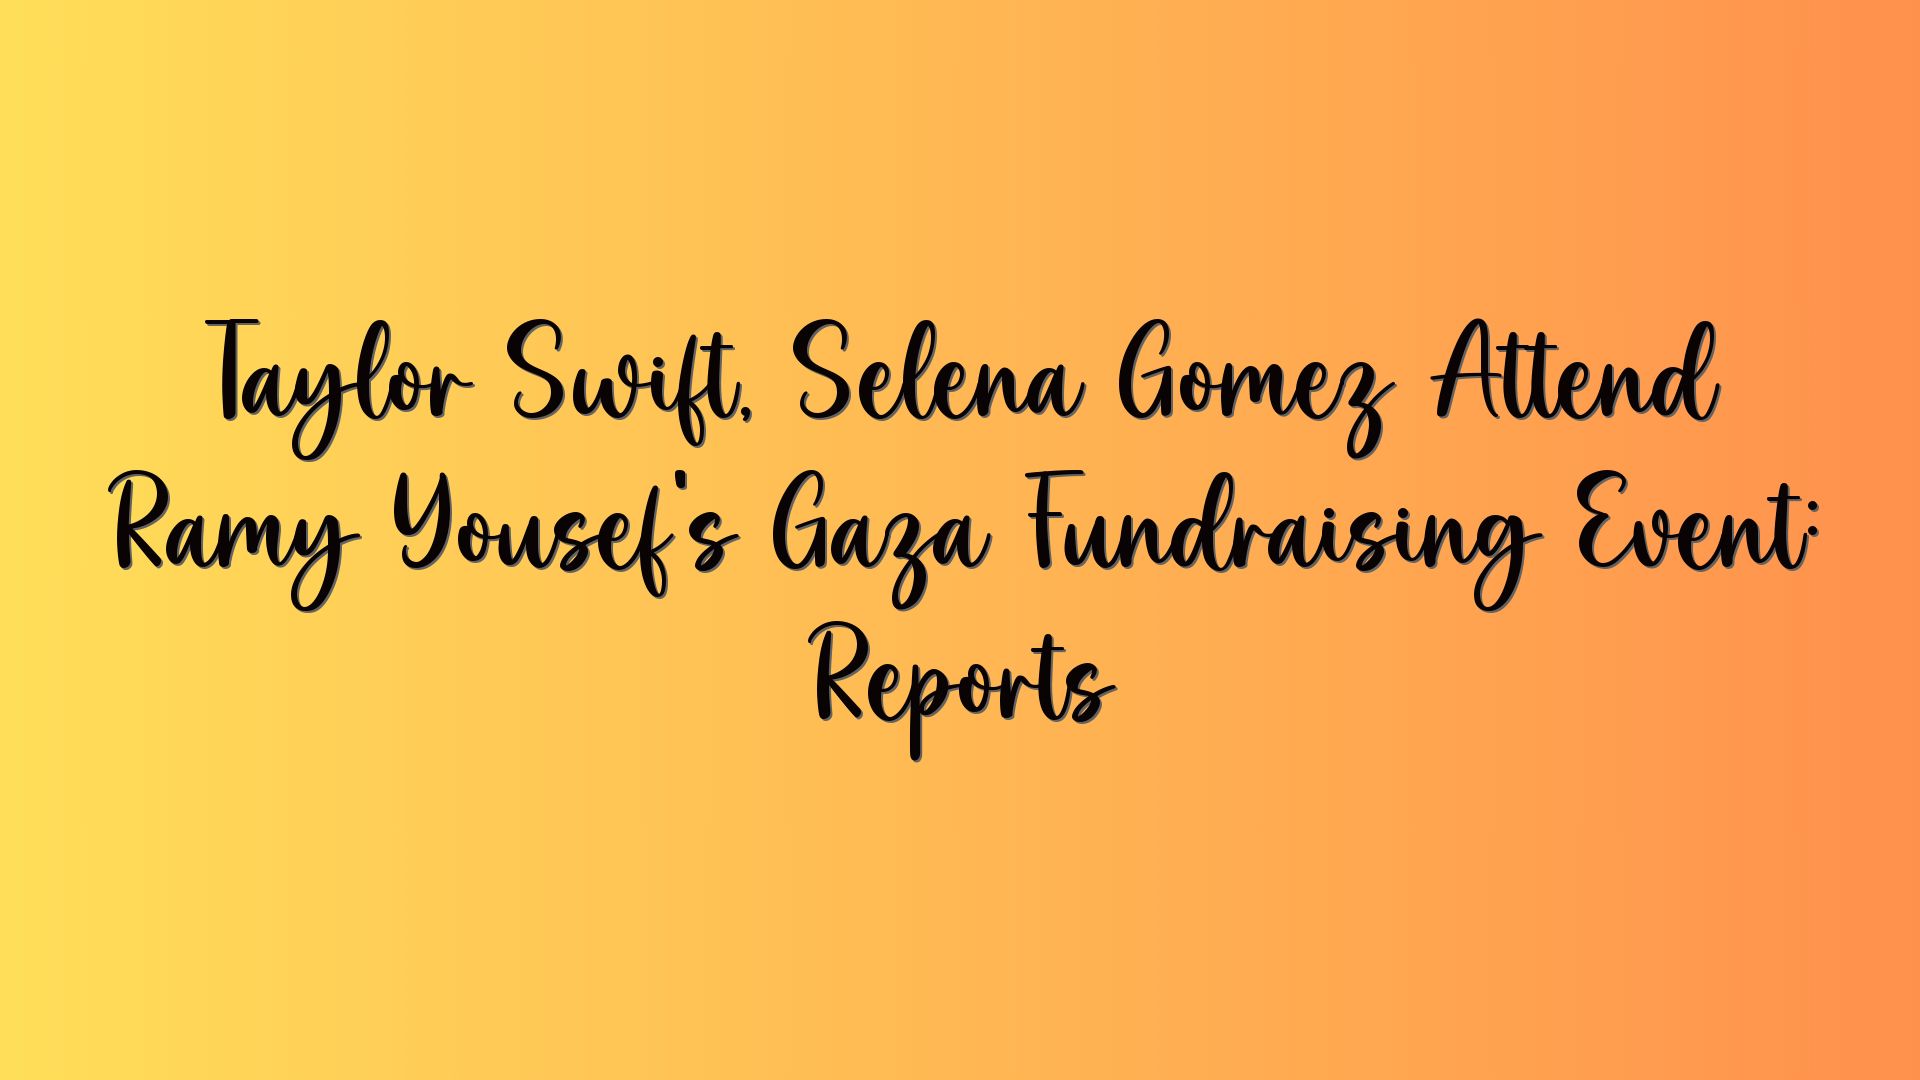 Taylor Swift, Selena Gomez Attend Ramy Yousef’s Gaza Fundraising Event: Reports